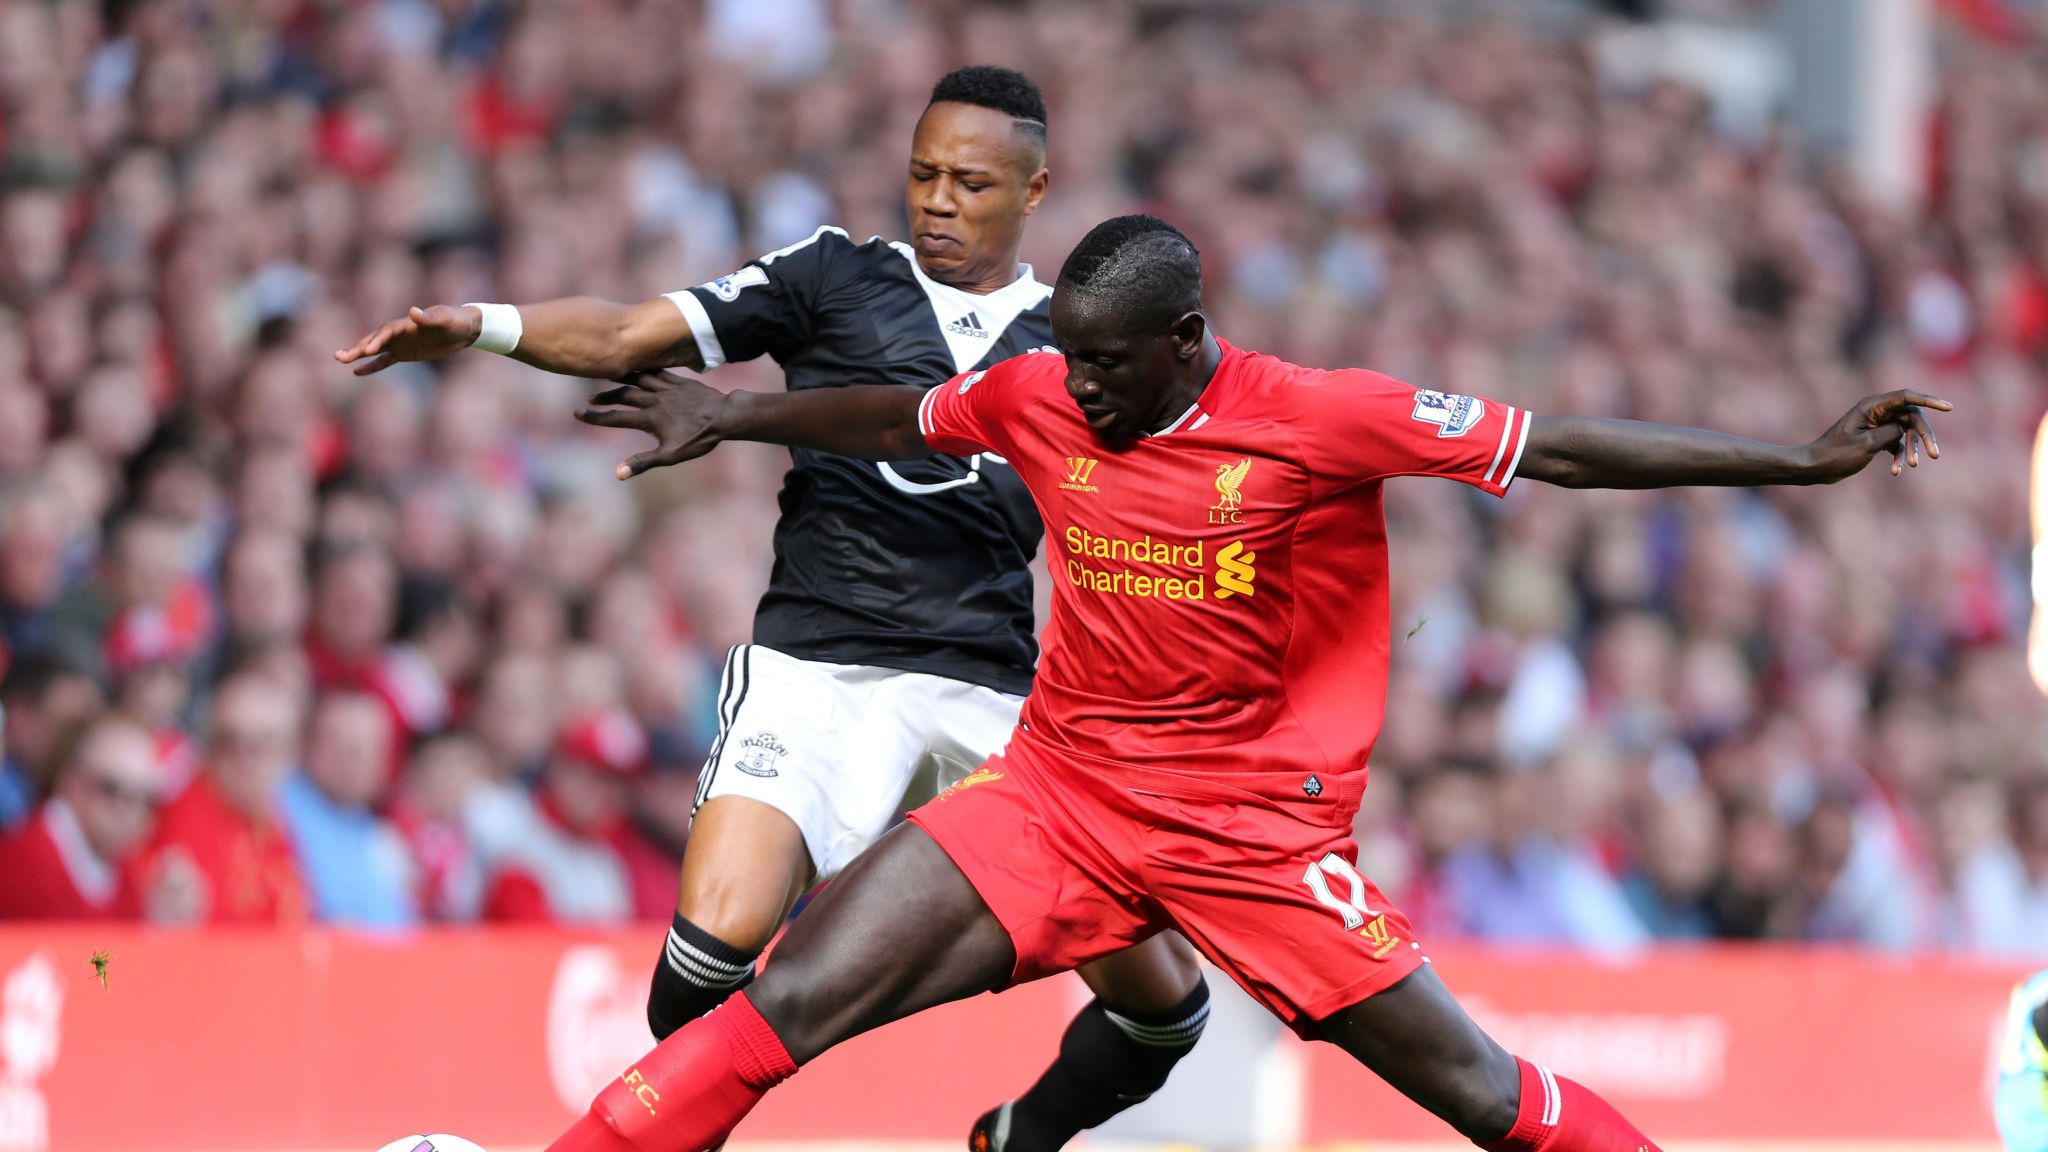 Ex-Liverpool defender, Mamadou Sakho beats Manager in training